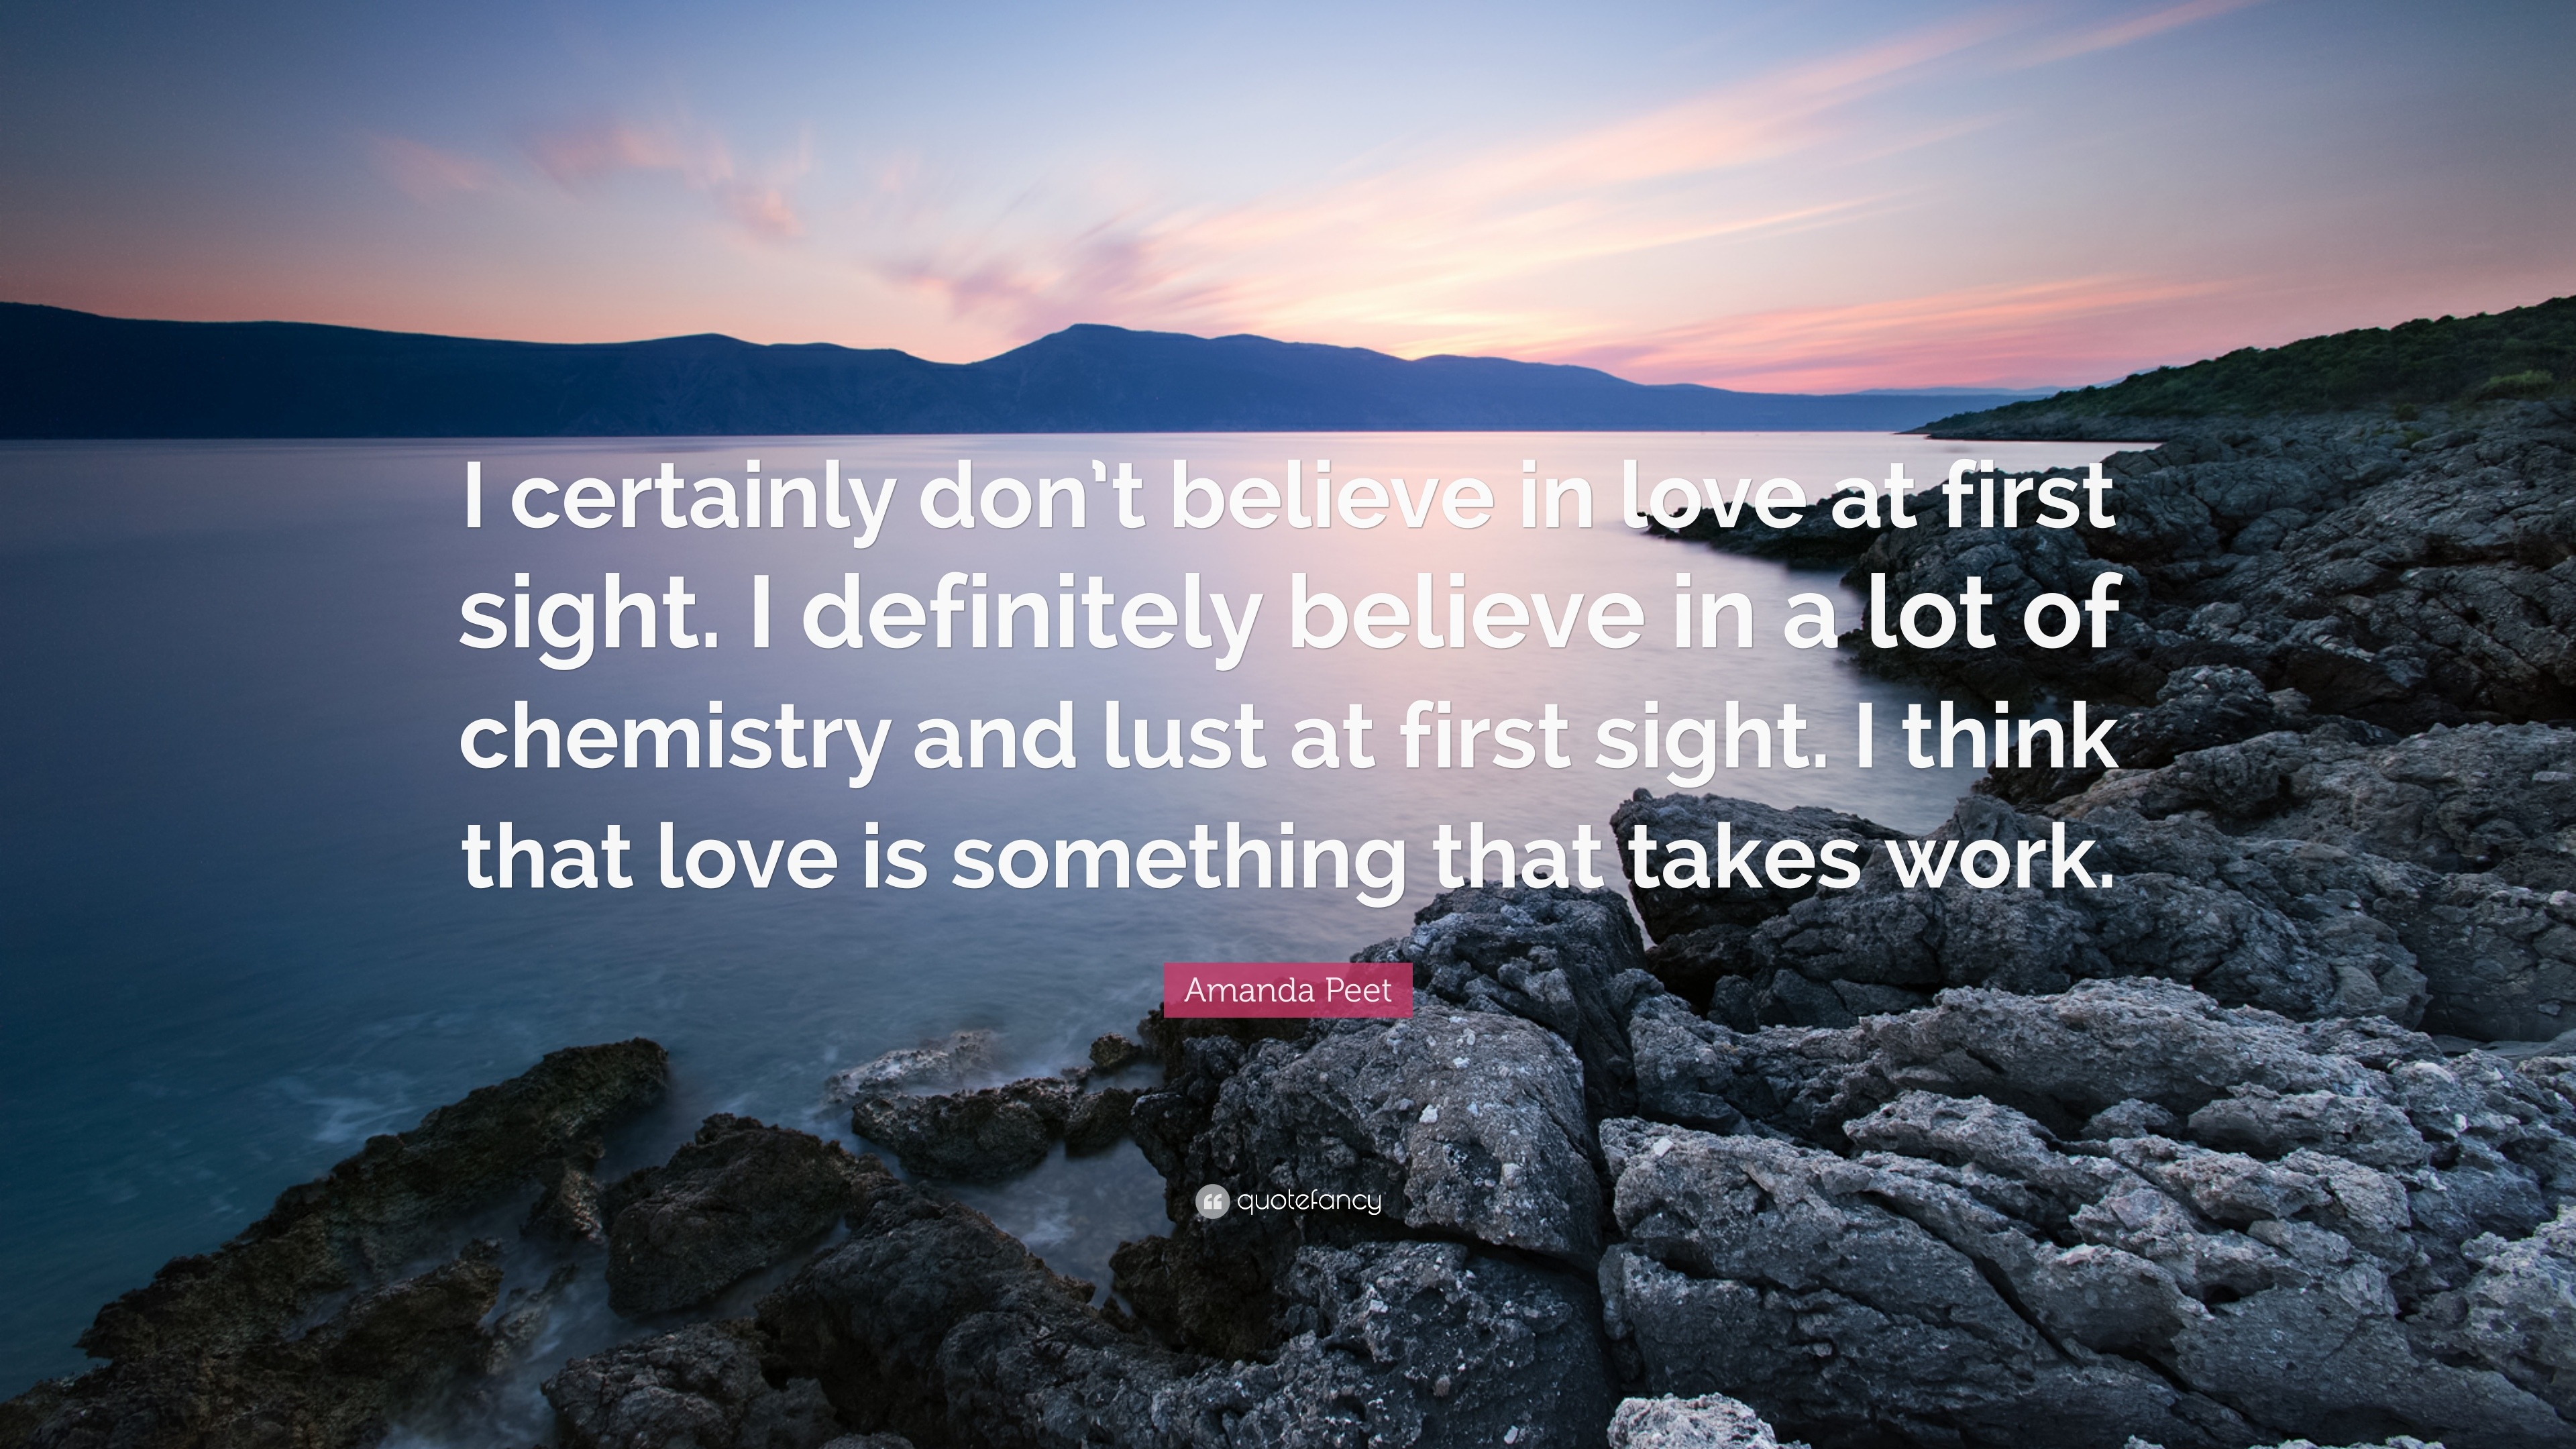 Amanda Peet Quote “I certainly don t believe in love at first sight